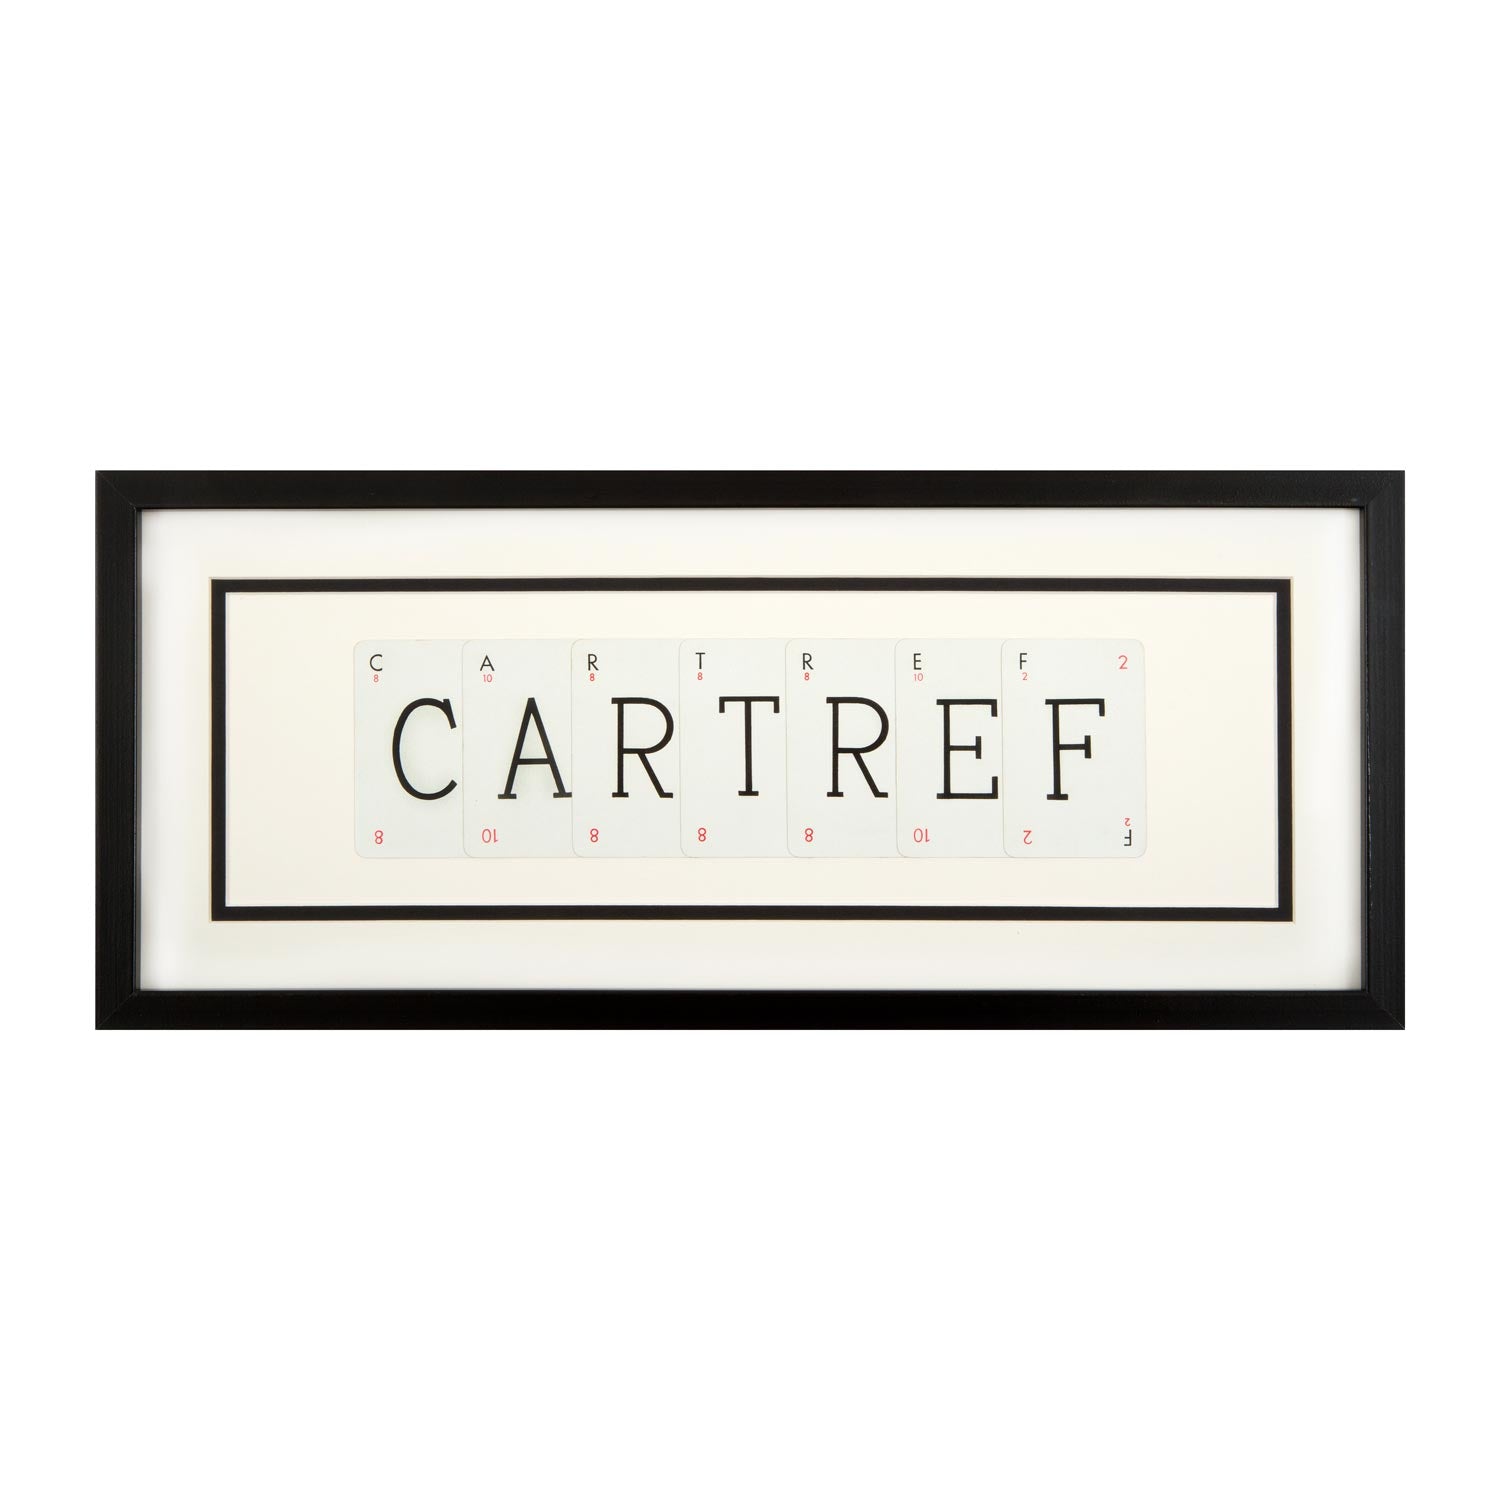 Picture - Vintage Playing Cards - Cartref / Home